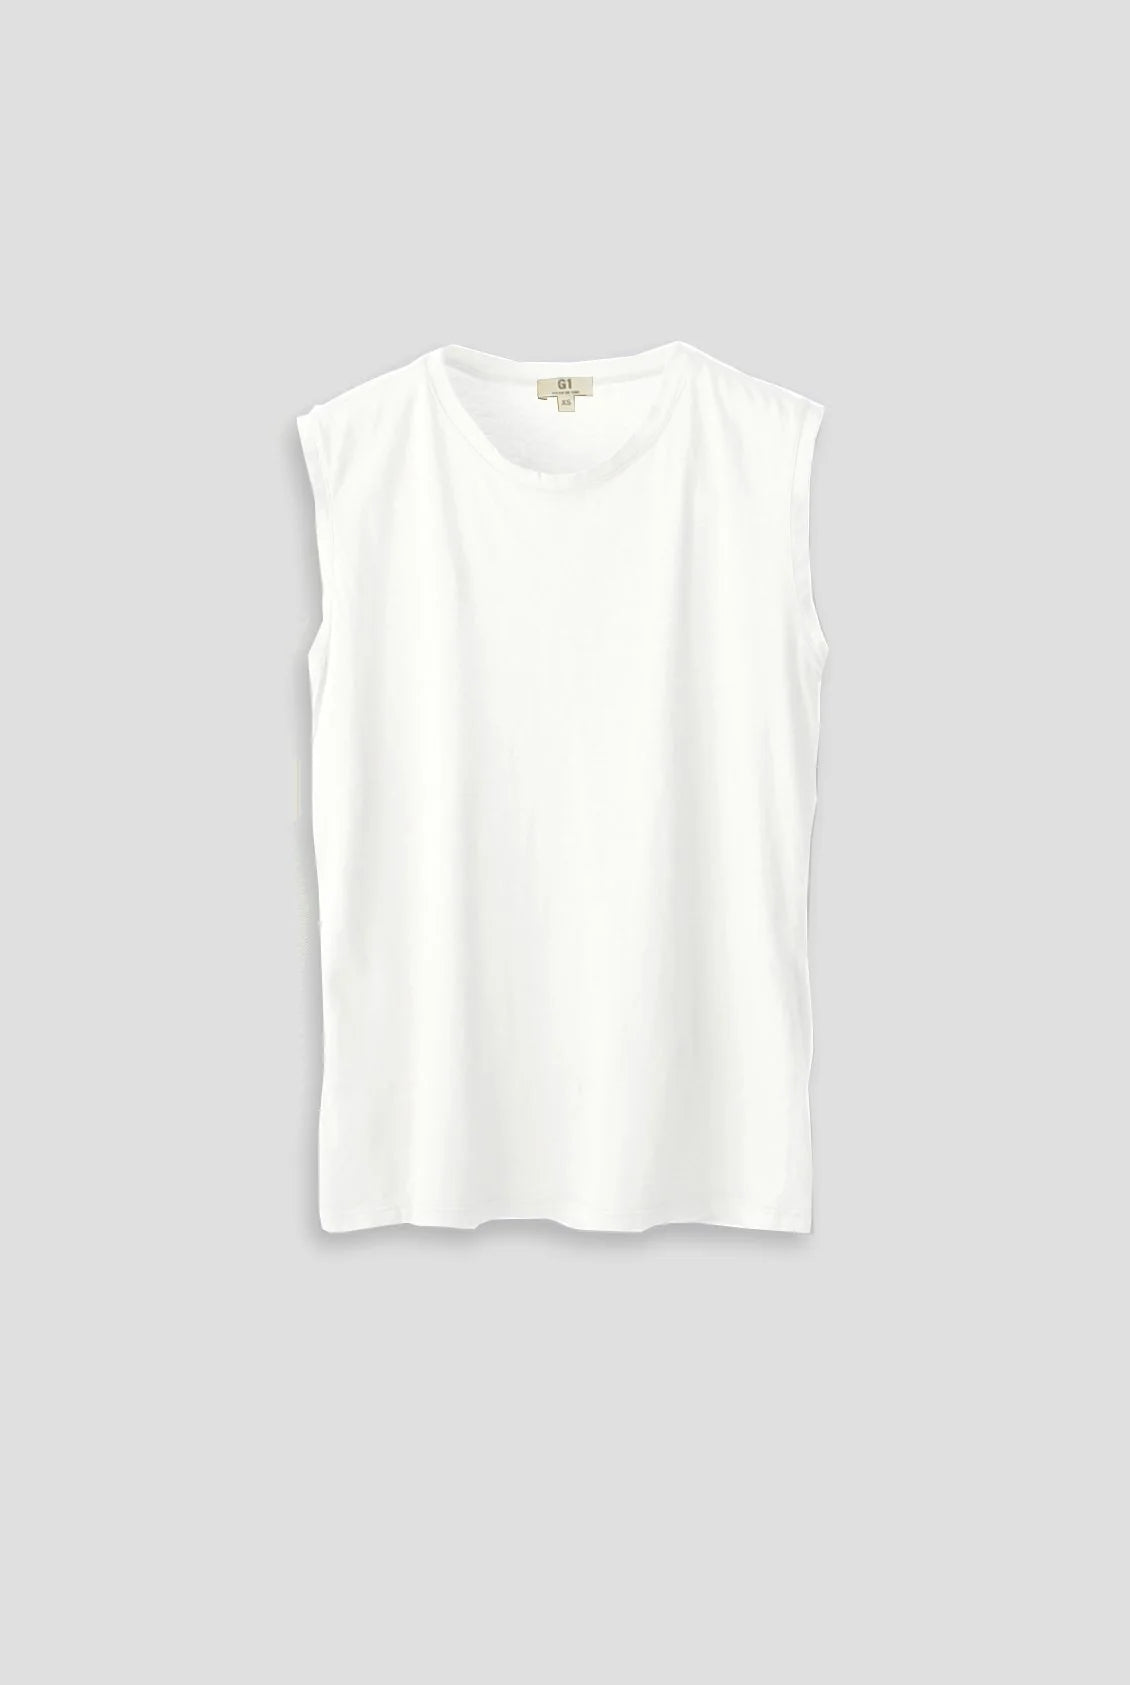 MUSCLE TANK IN WHITE